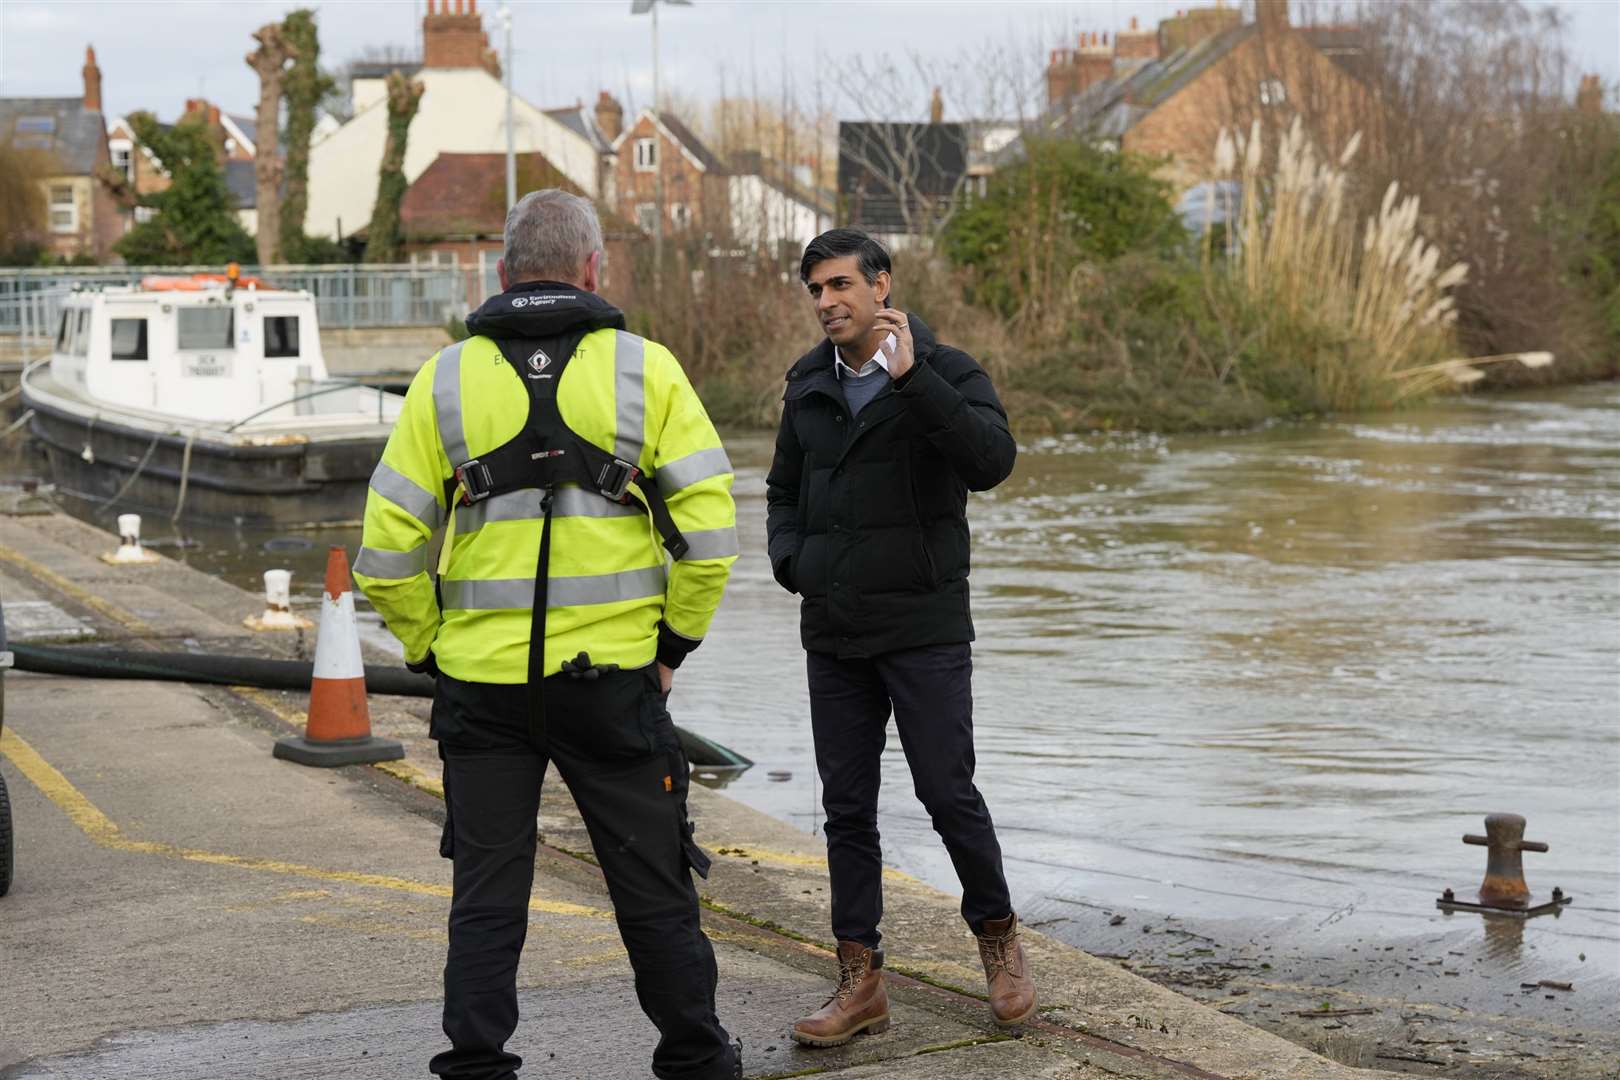 Prime Minister Rishi Sunak speaks to a member of the Environment Agency as he looks at flood defences during a visit to Osney, Oxford, Oxfordshire (Frank Augstein/PA)